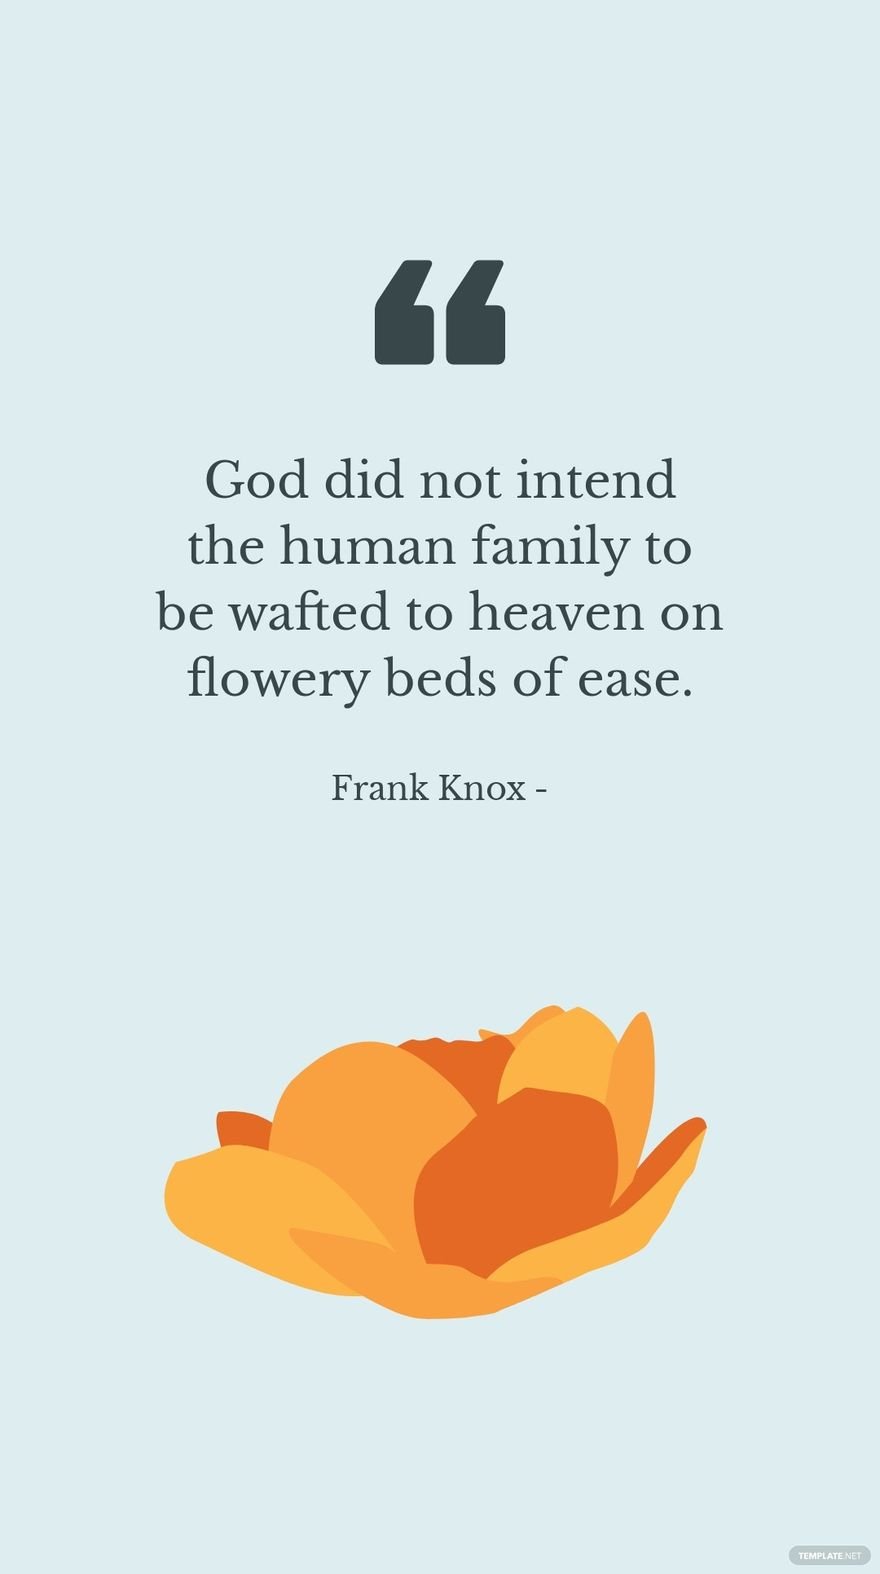 Frank Knox - God did not intend the human family to be wafted to heaven on flowery beds of ease.